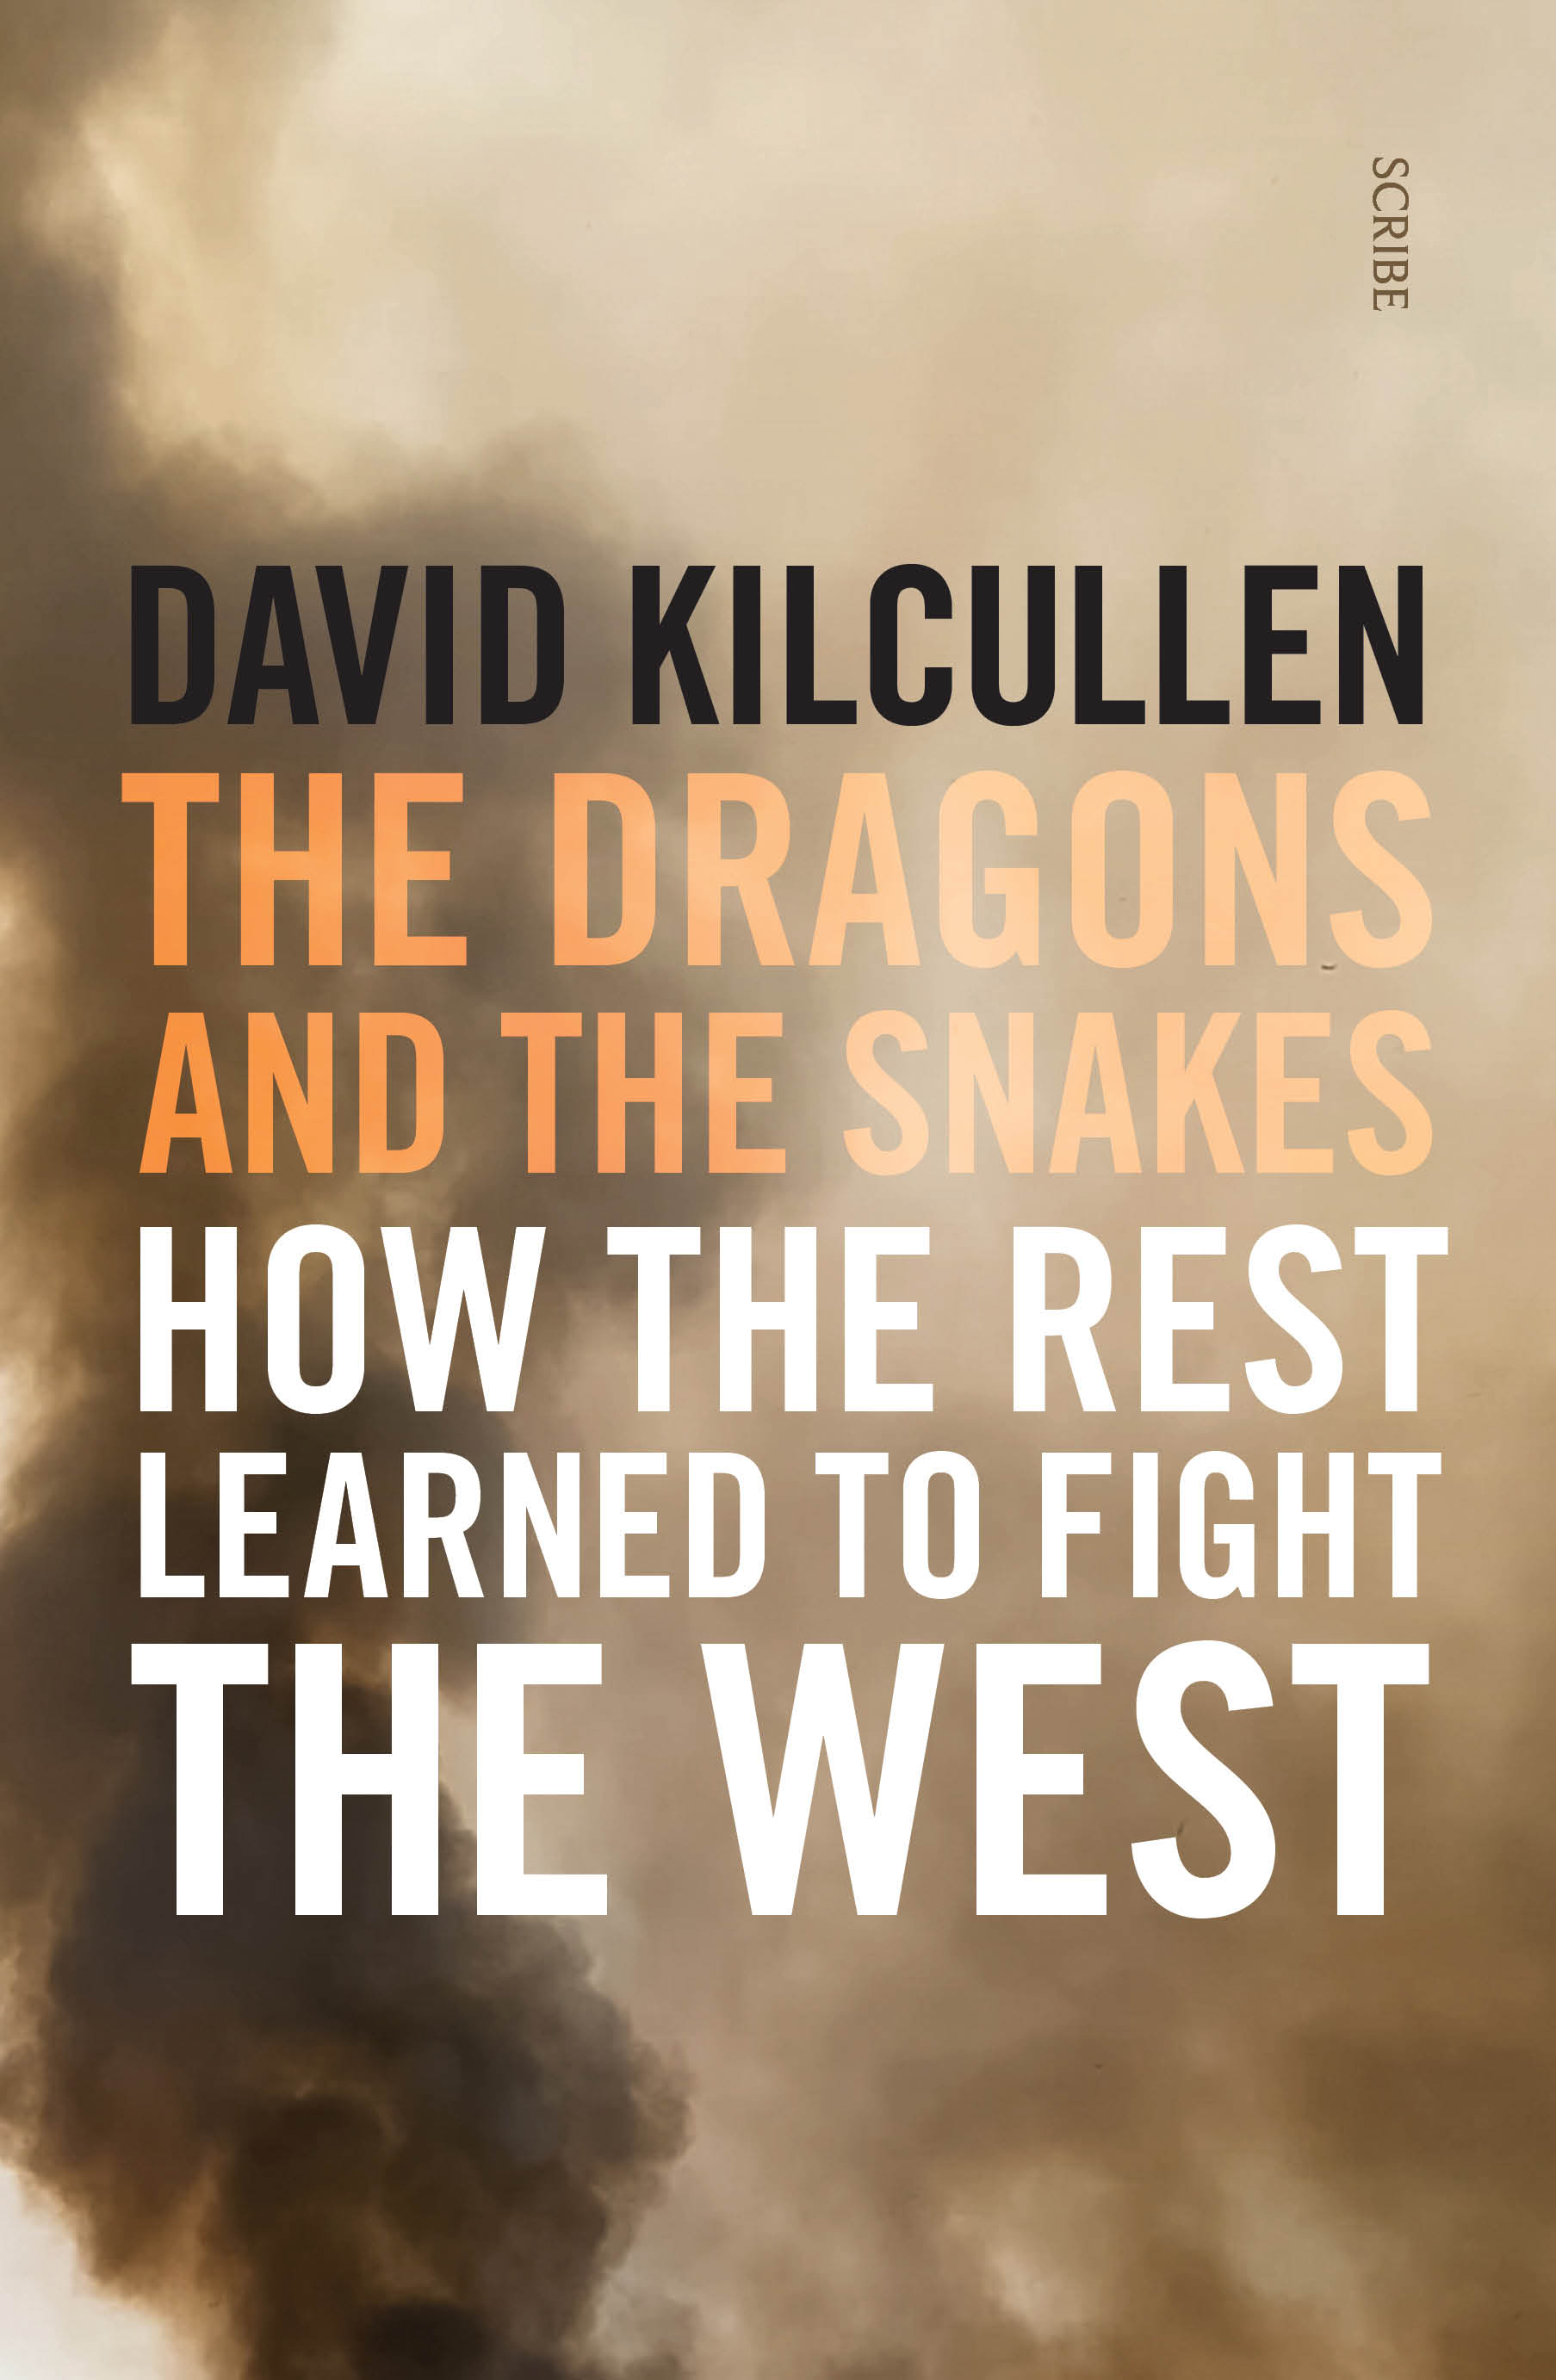 [EPUB] The Dragons and the Snakes: how the rest learned to fight the west